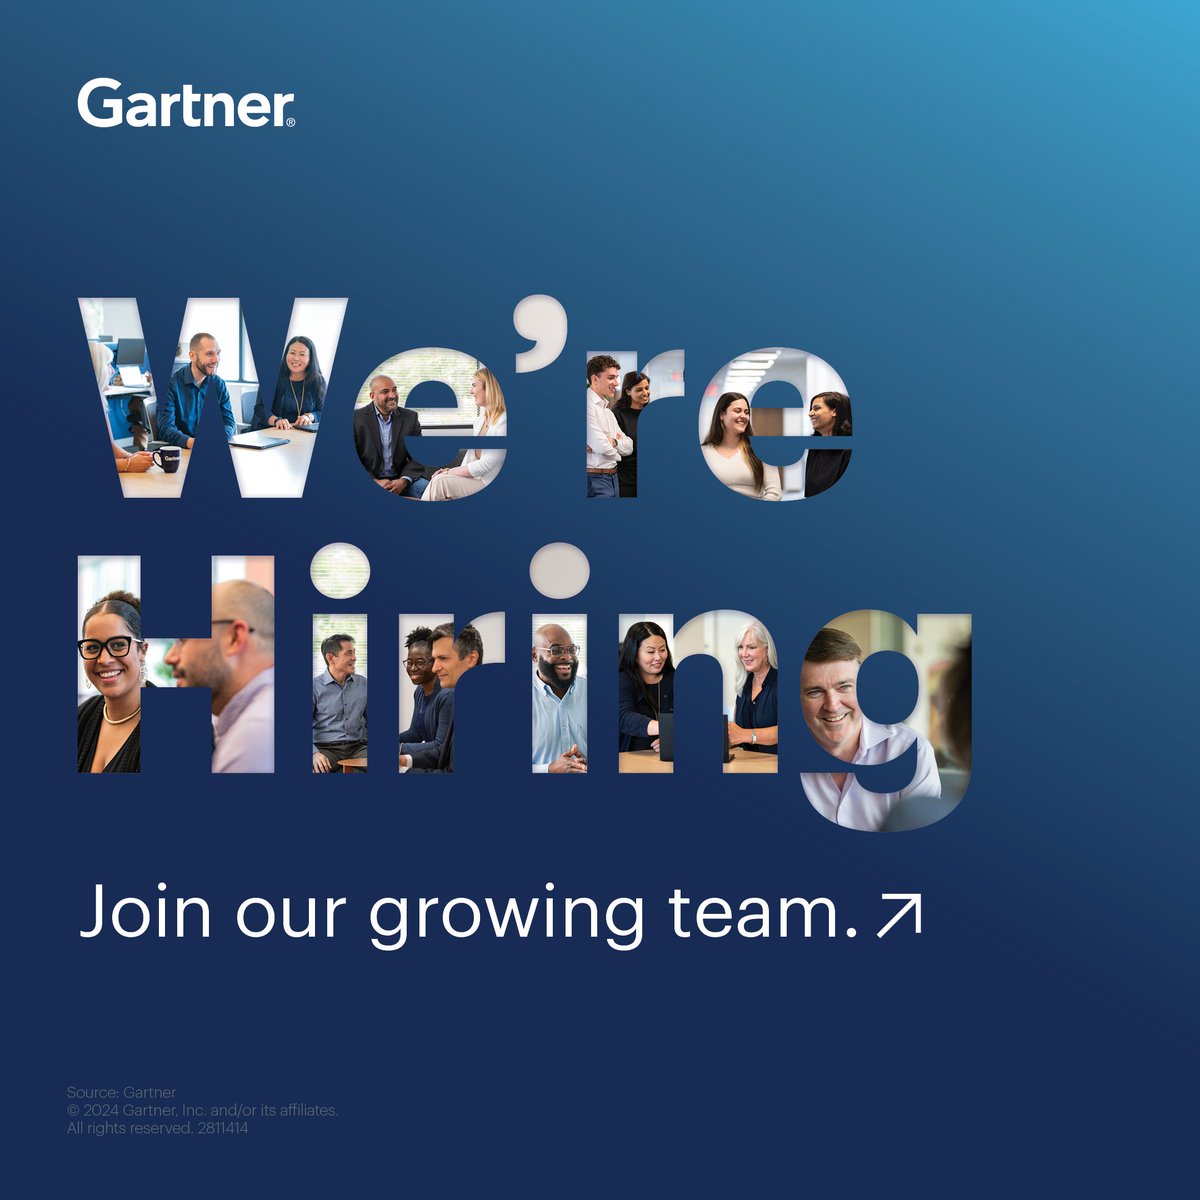 At Gartner, the possibilities are endless. We'll give you the tools and resources you need to achieve your goals — and so much more. Apply today: gtnr.it/4atSapw #LifeAtGartner #CareerGrowth